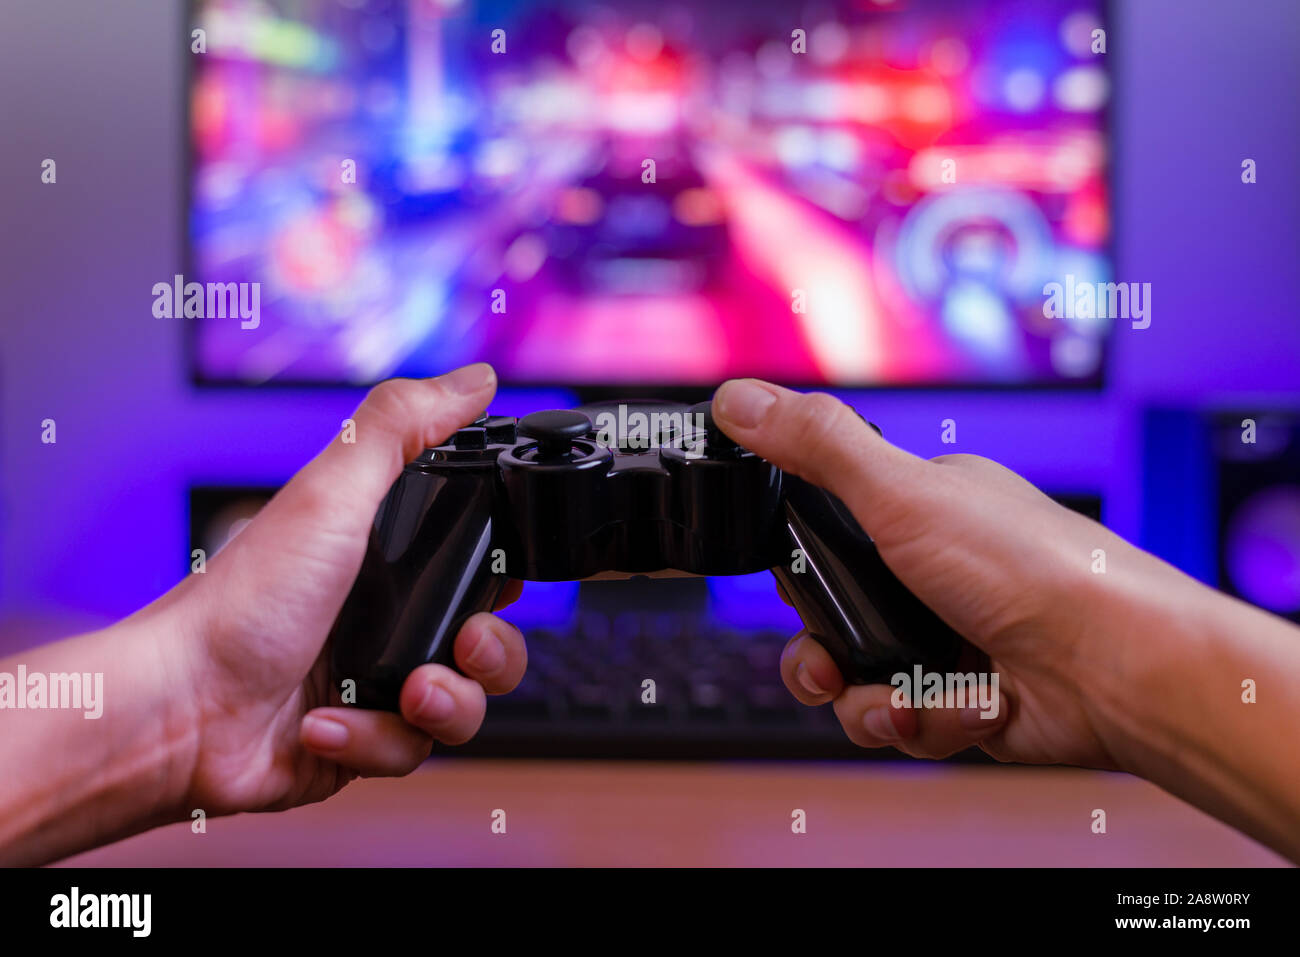 Joypad in hands. Gaming concept. Computer display with racing game and rgb light in background. Stock Photo